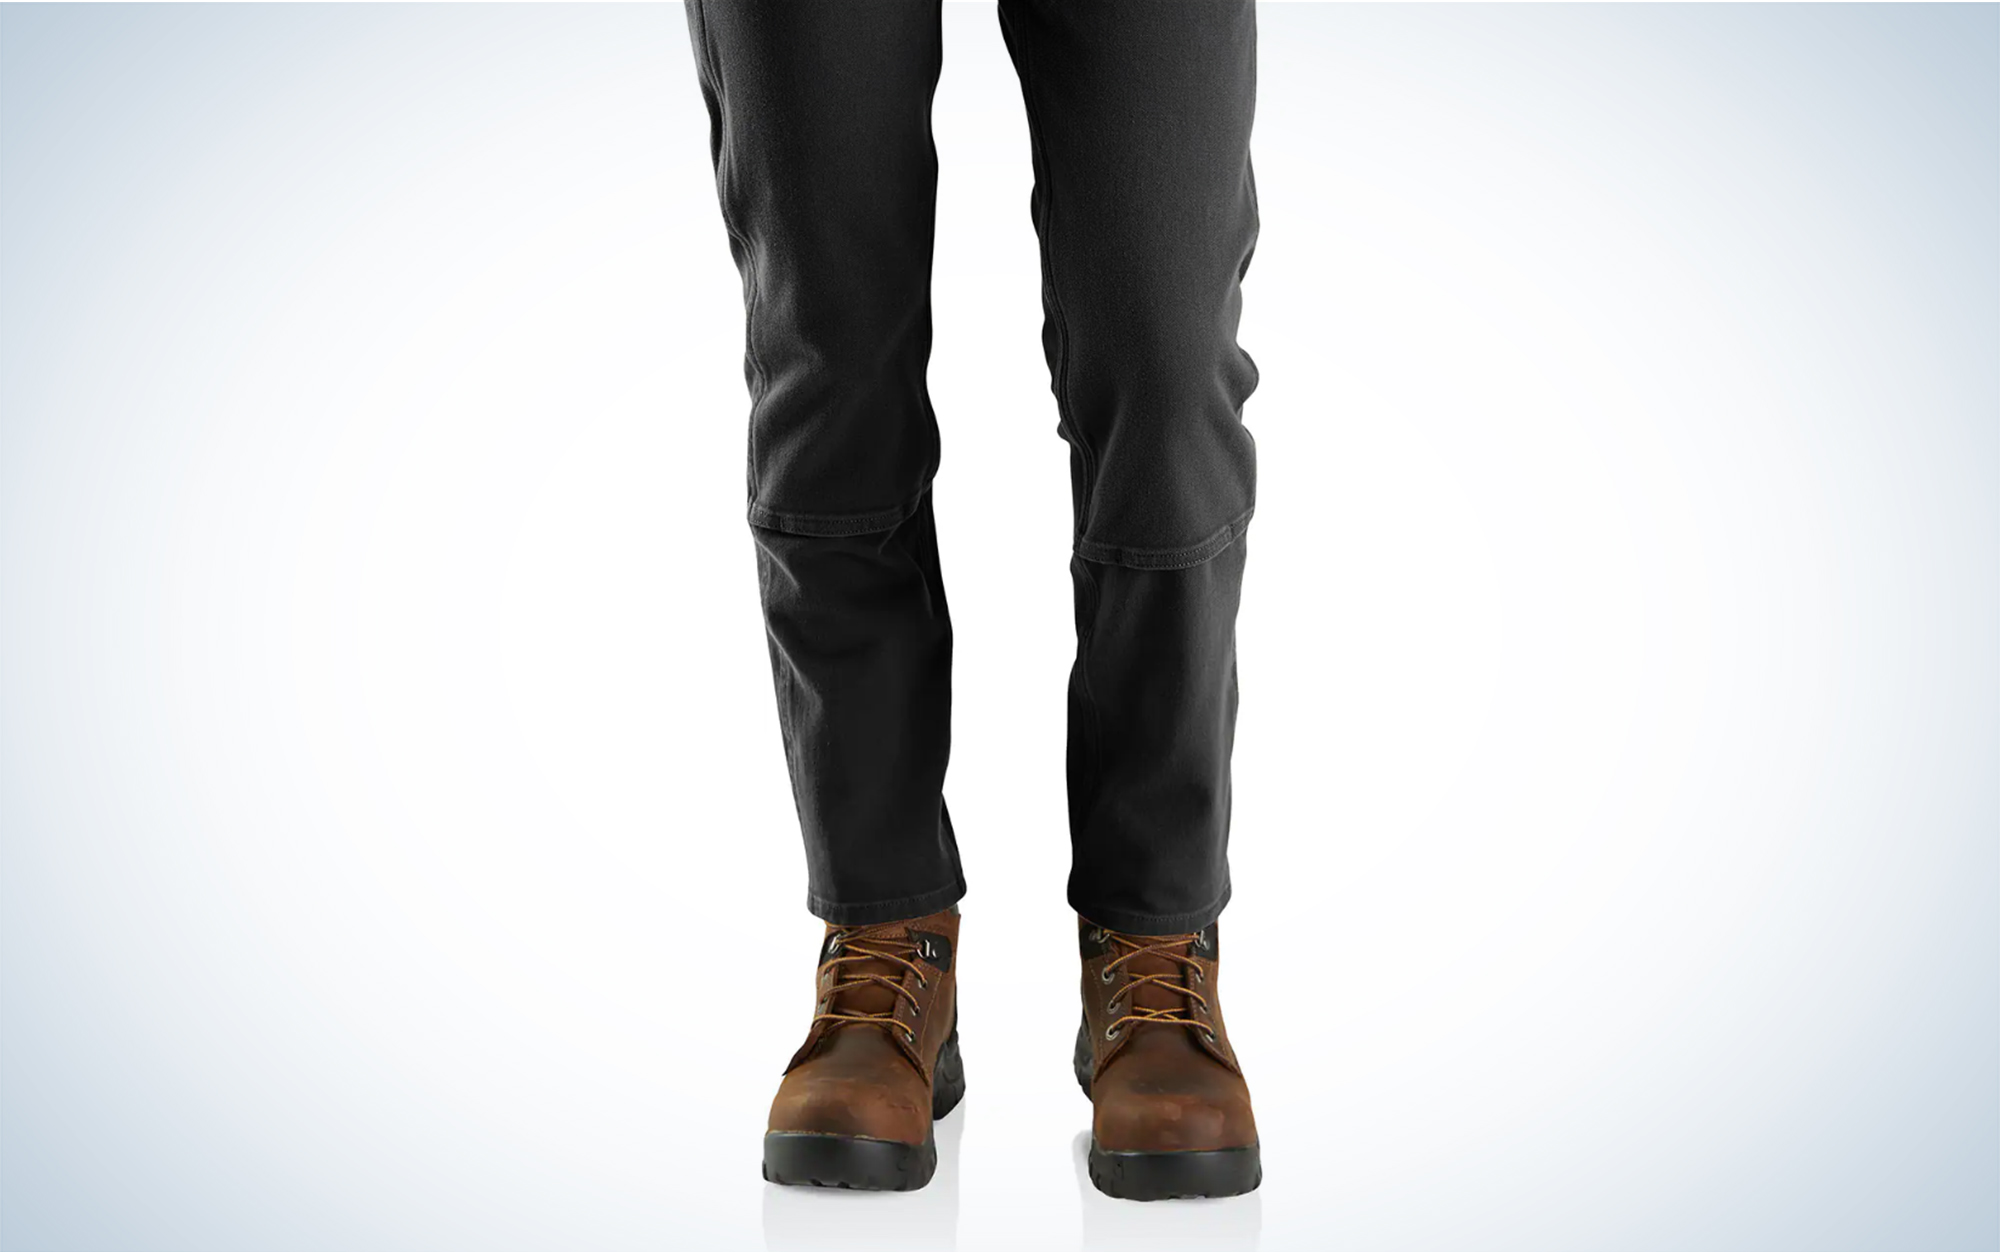 The Carhartt Women's Rugged Flex Relaxed Fit Twill Double Front Work Pants are a great value.